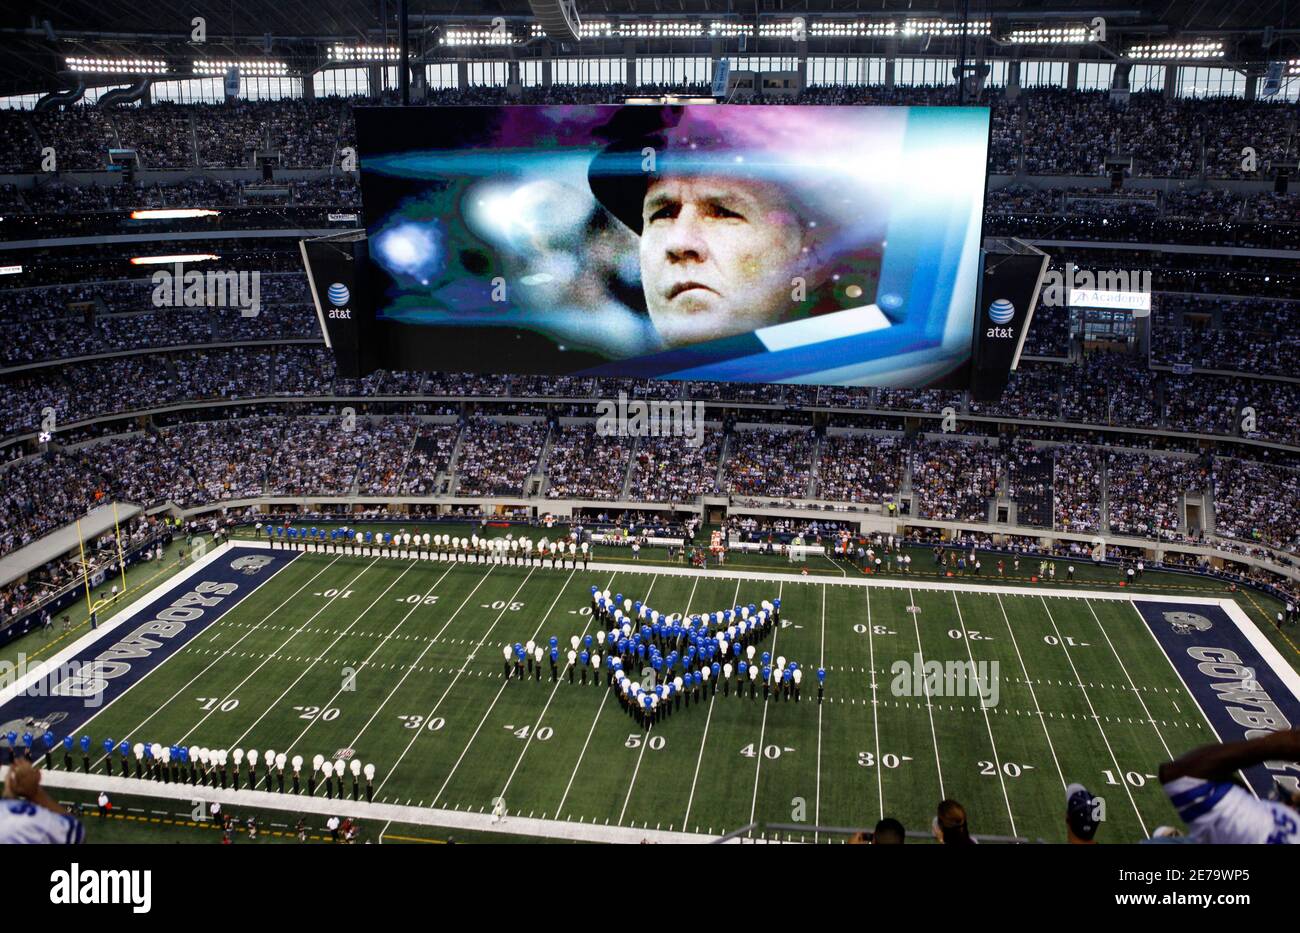 Dallas Cowboys former Coach Tom Landry's image is displayed on the giant screen at the Cowboys' NFL home opener game against the New York Giants in the new Cowboys Stadium, in Arlington, Texas, September 20, 2009.      REUTERS/Jessica Rinaldi (UNITED STATES SPORT FOOTBALL) Stock Photo